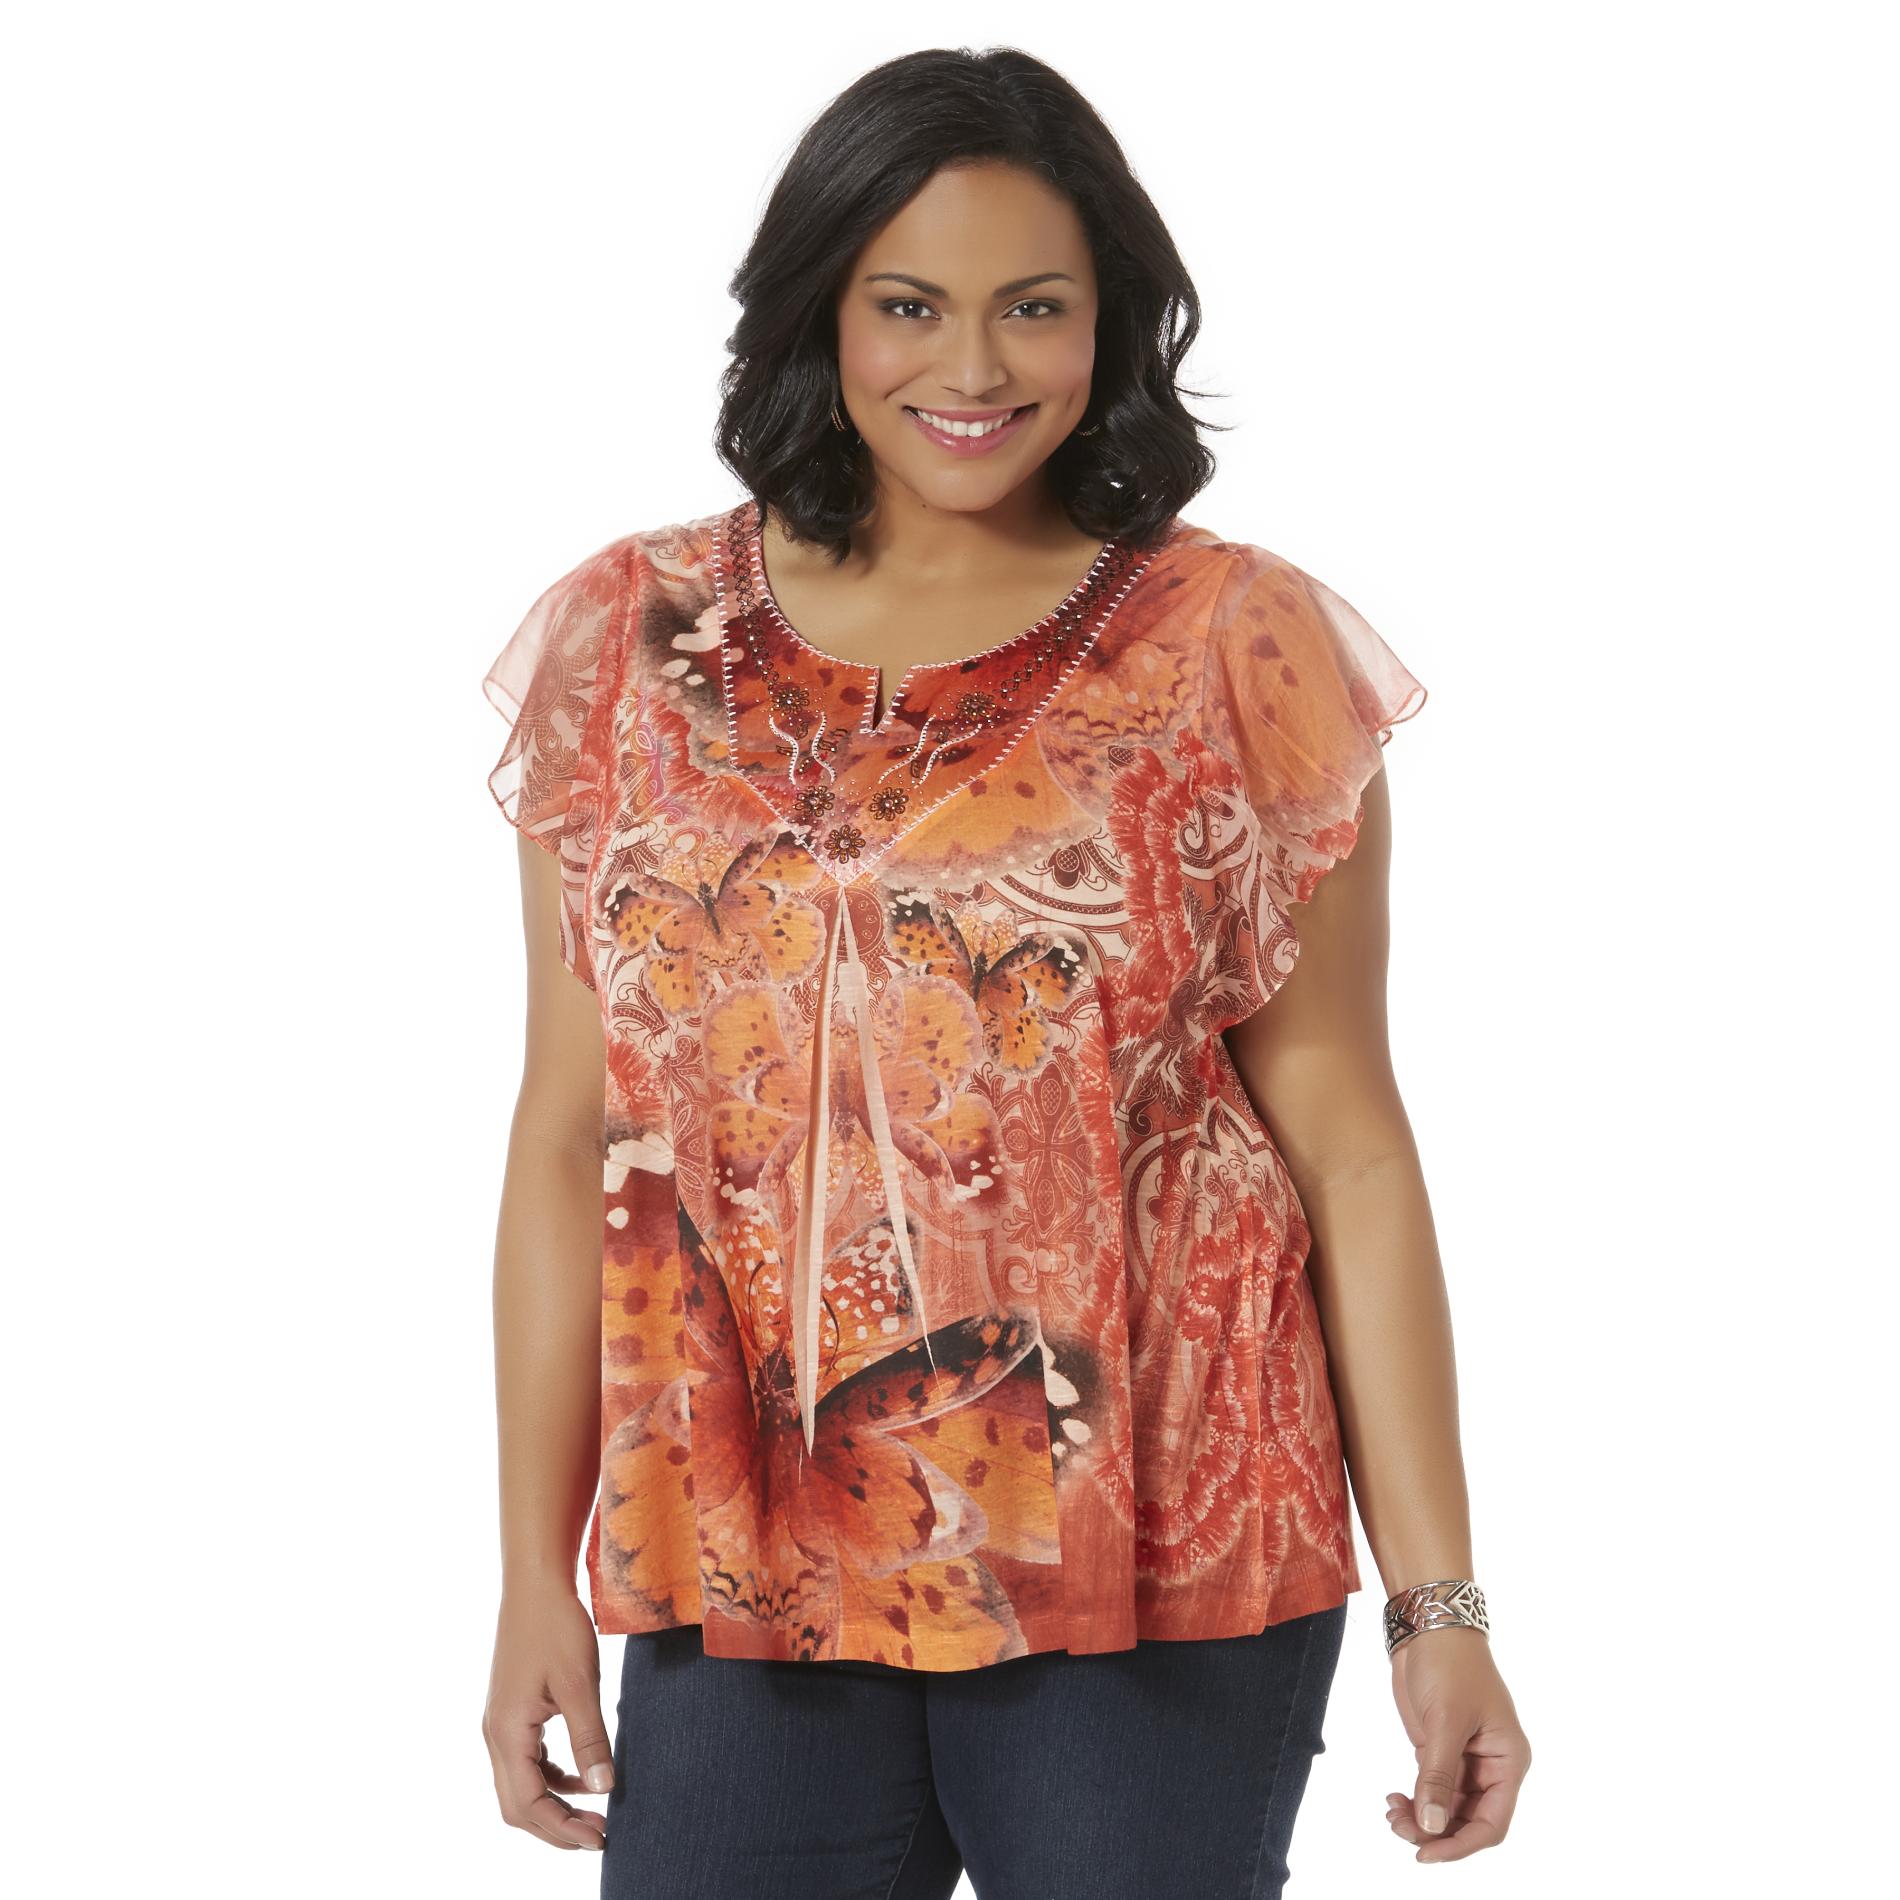 Live and Let Live Women's Plus Flutter Sleeve Top - Butterfly Print